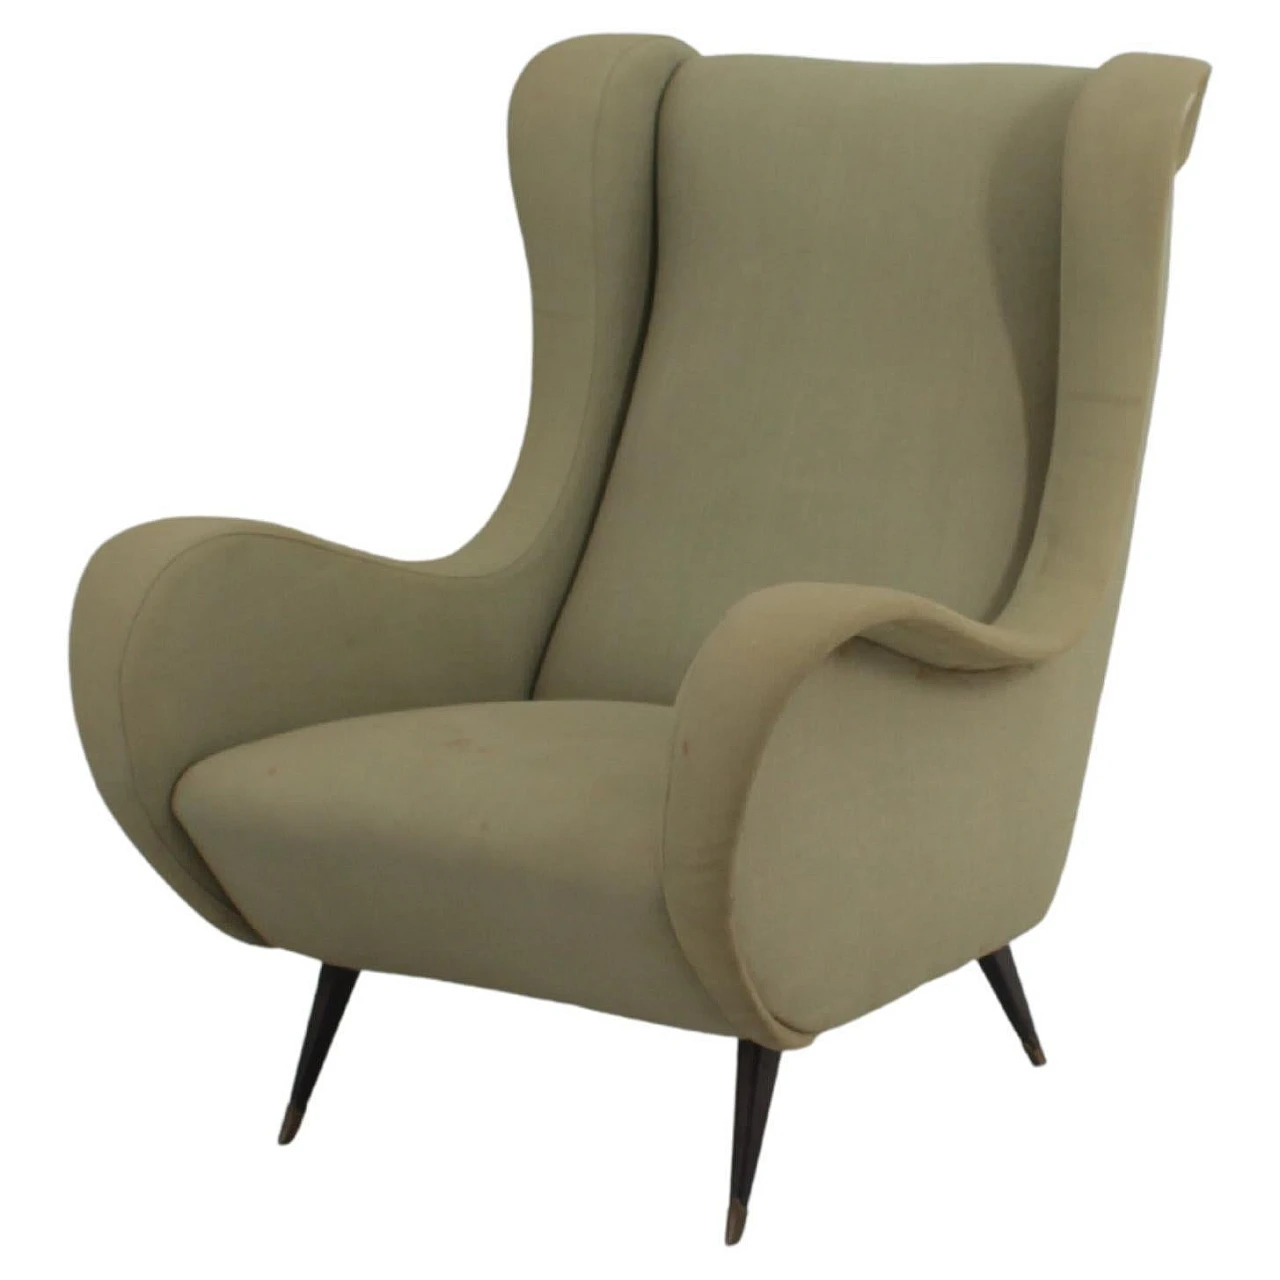 Senior style armchair attributed to Marco Zanuso for Arflex, 1950s 1